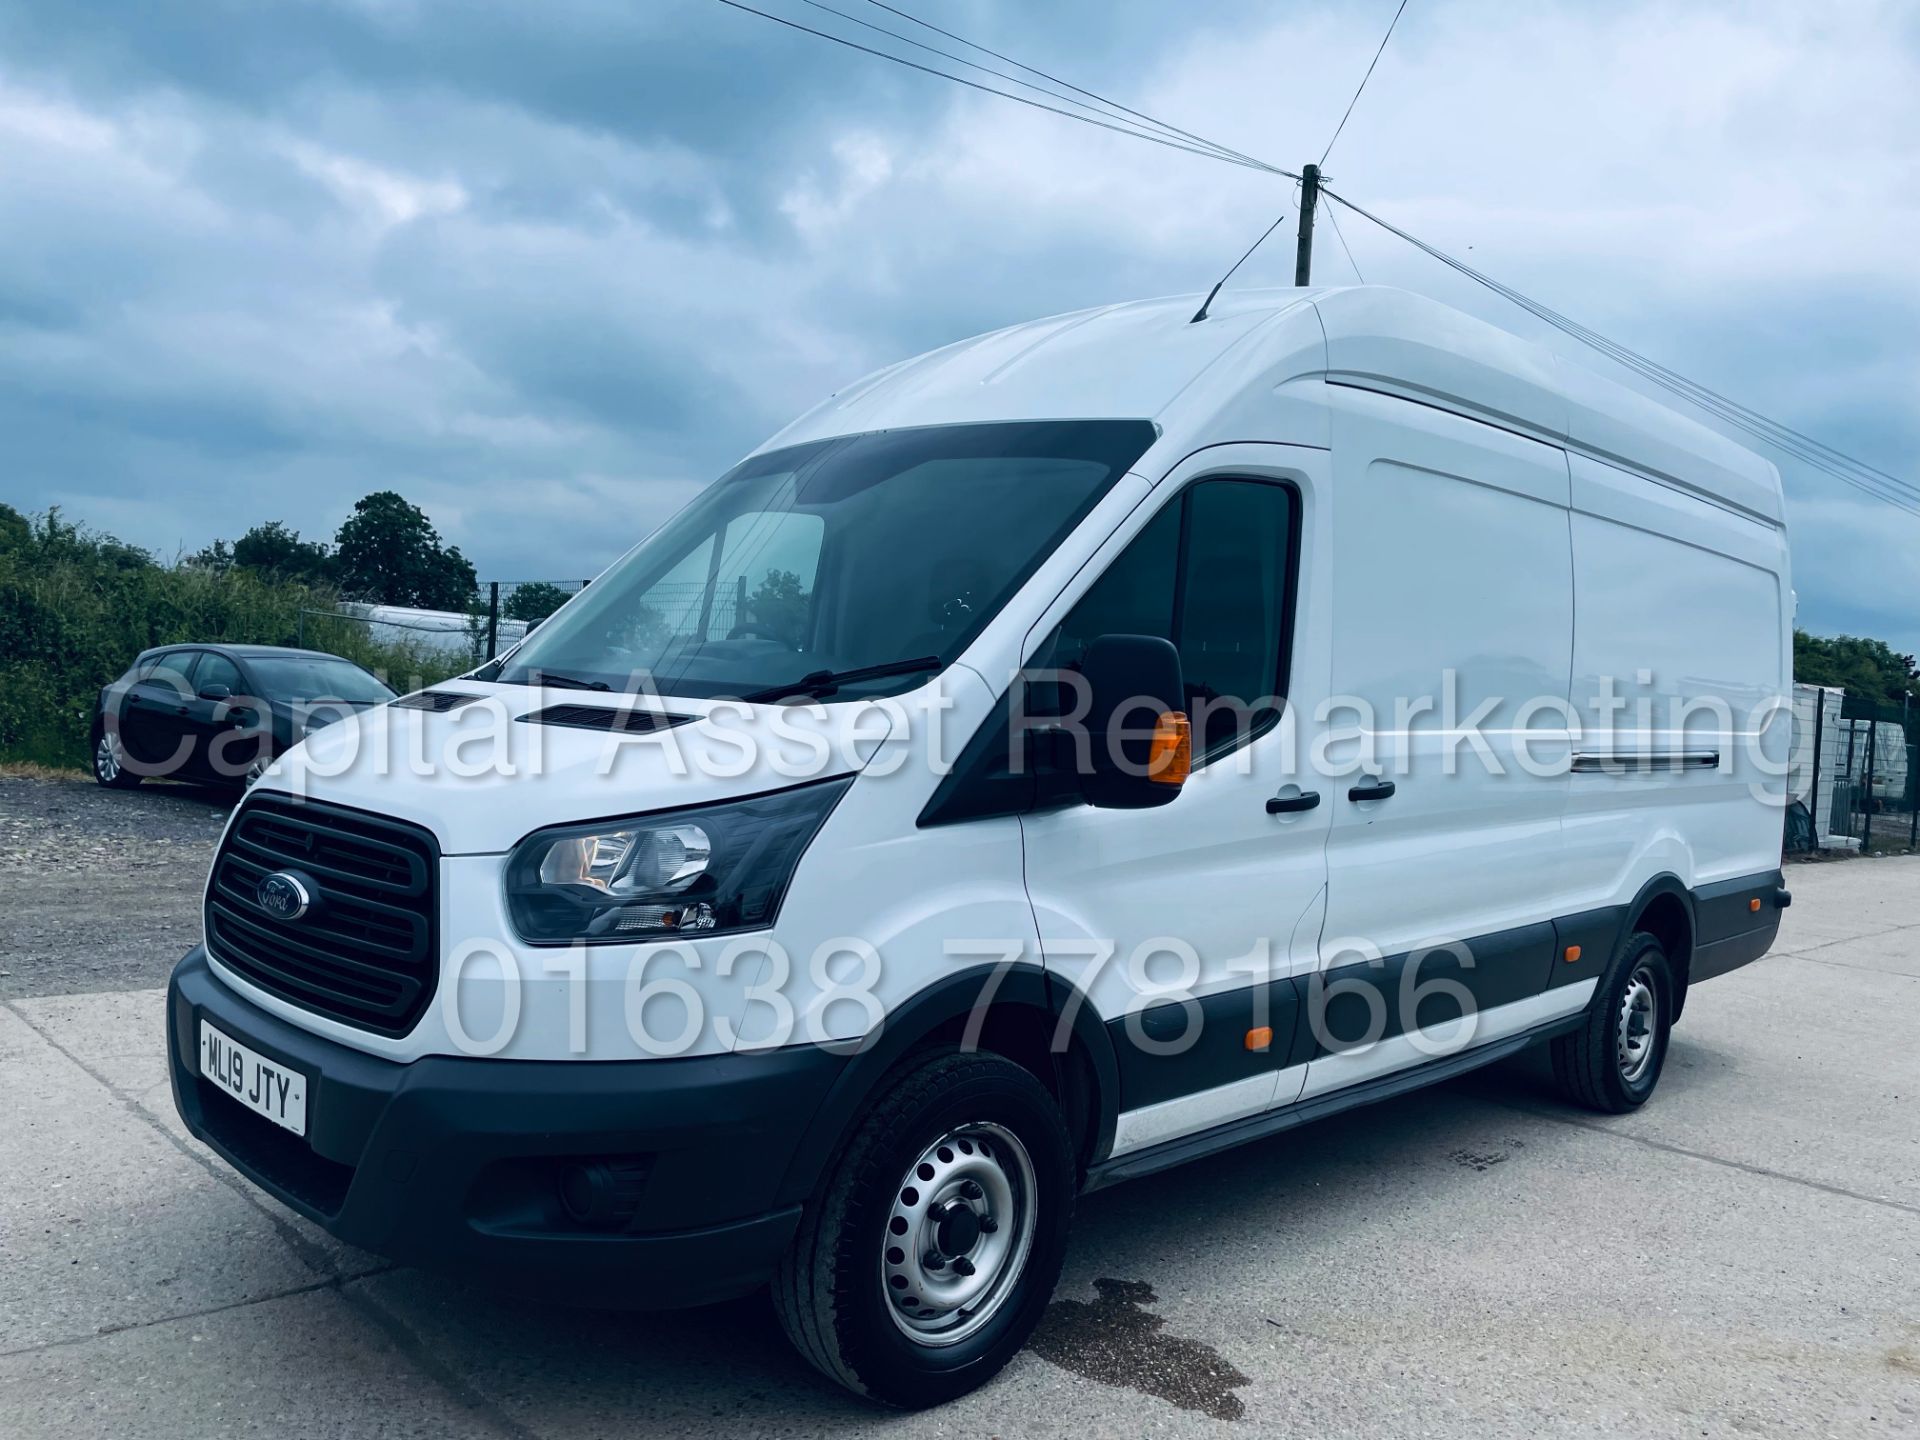 FORD TRANSIT 130 T350 *L4 - XLWB HI-ROOF* (2019 - EURO 6) '2.0 TDCI - 6 SPEED' (1 OWNER) *AIR CON* - Image 5 of 42